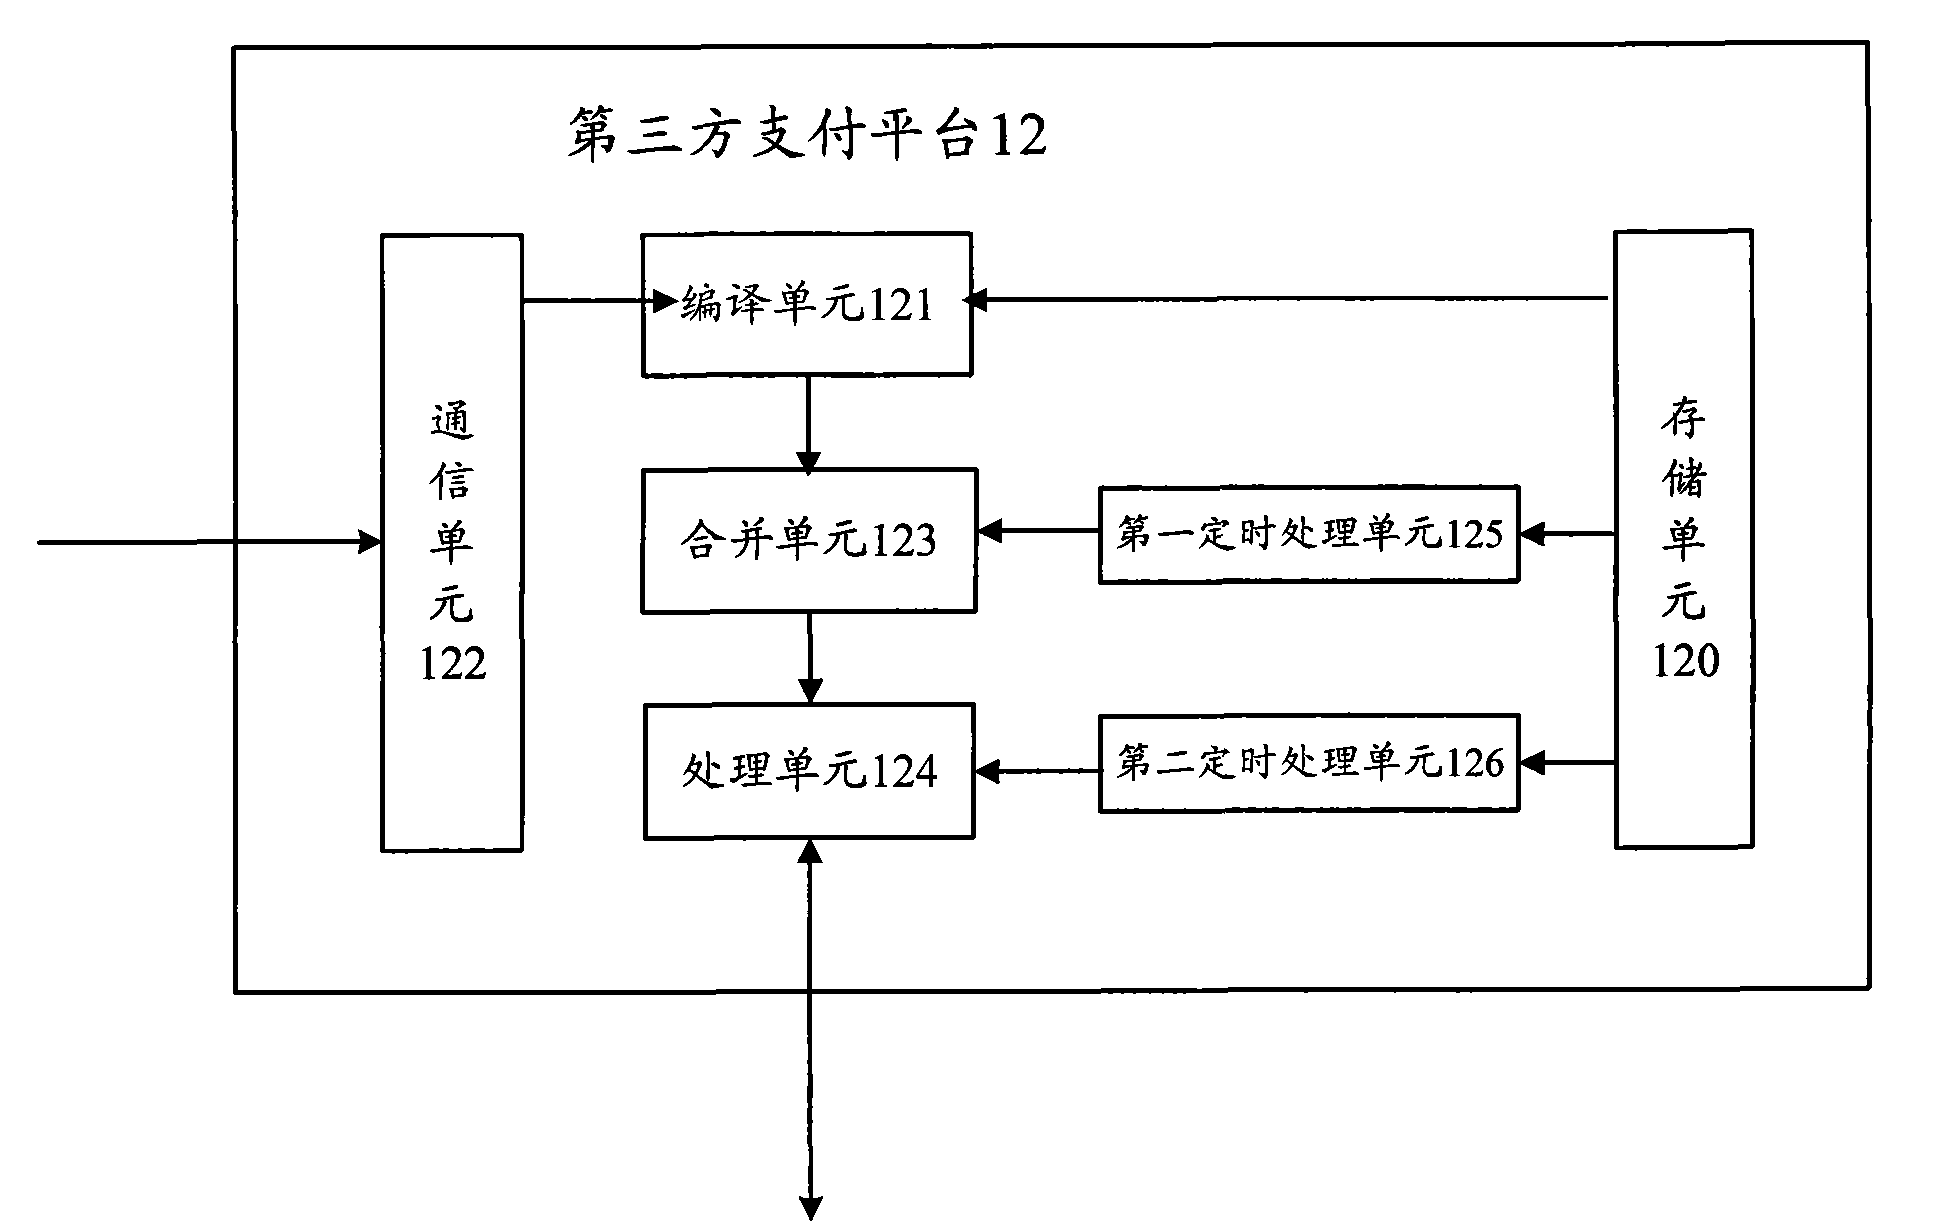 Method, device and system for realizing merging payment